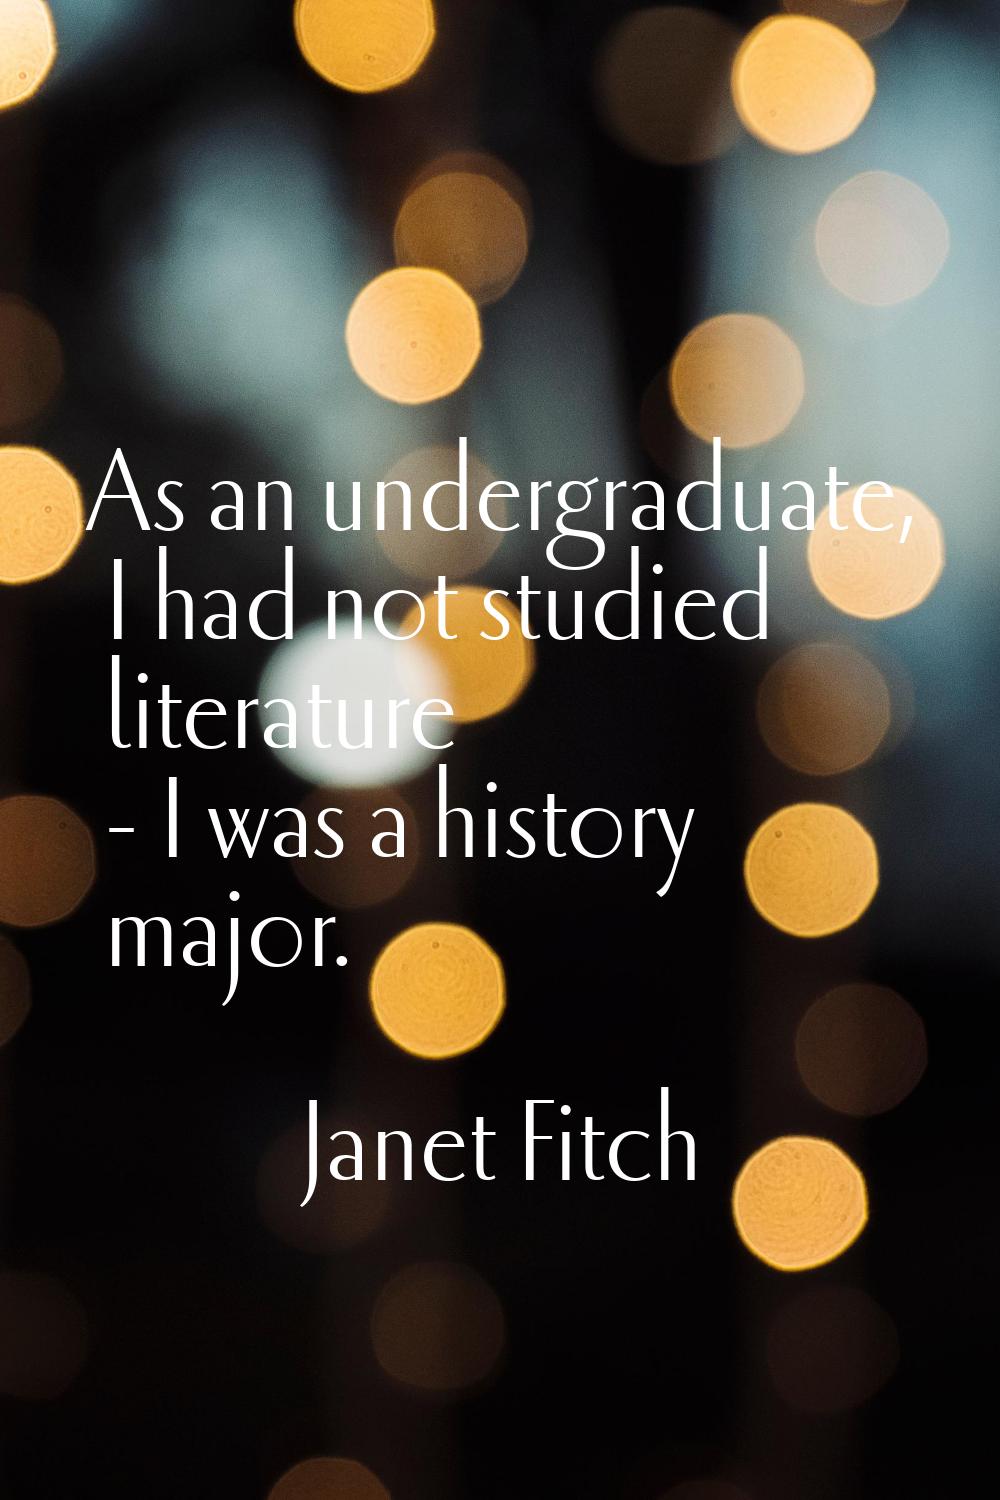 As an undergraduate, I had not studied literature - I was a history major.